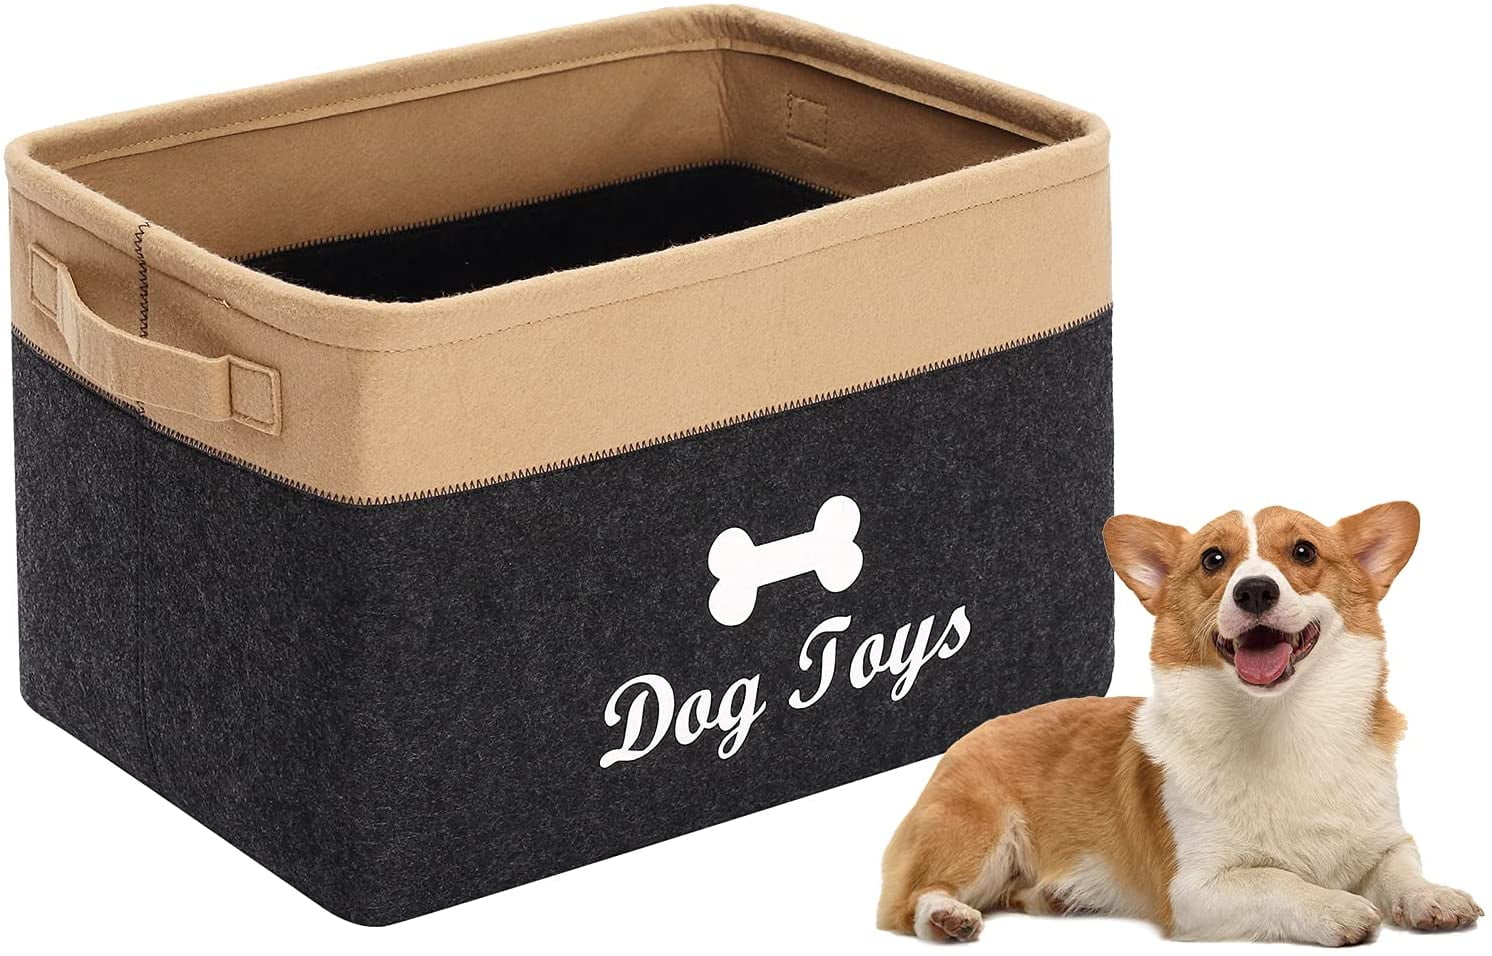 leashes Durable Cotton Rope Dog Toy Storage Clothing and Any Doggie Stuff Blankets Puppy Toy Box Perfect for organizing pet Toys pet Bed Large Dog bin 